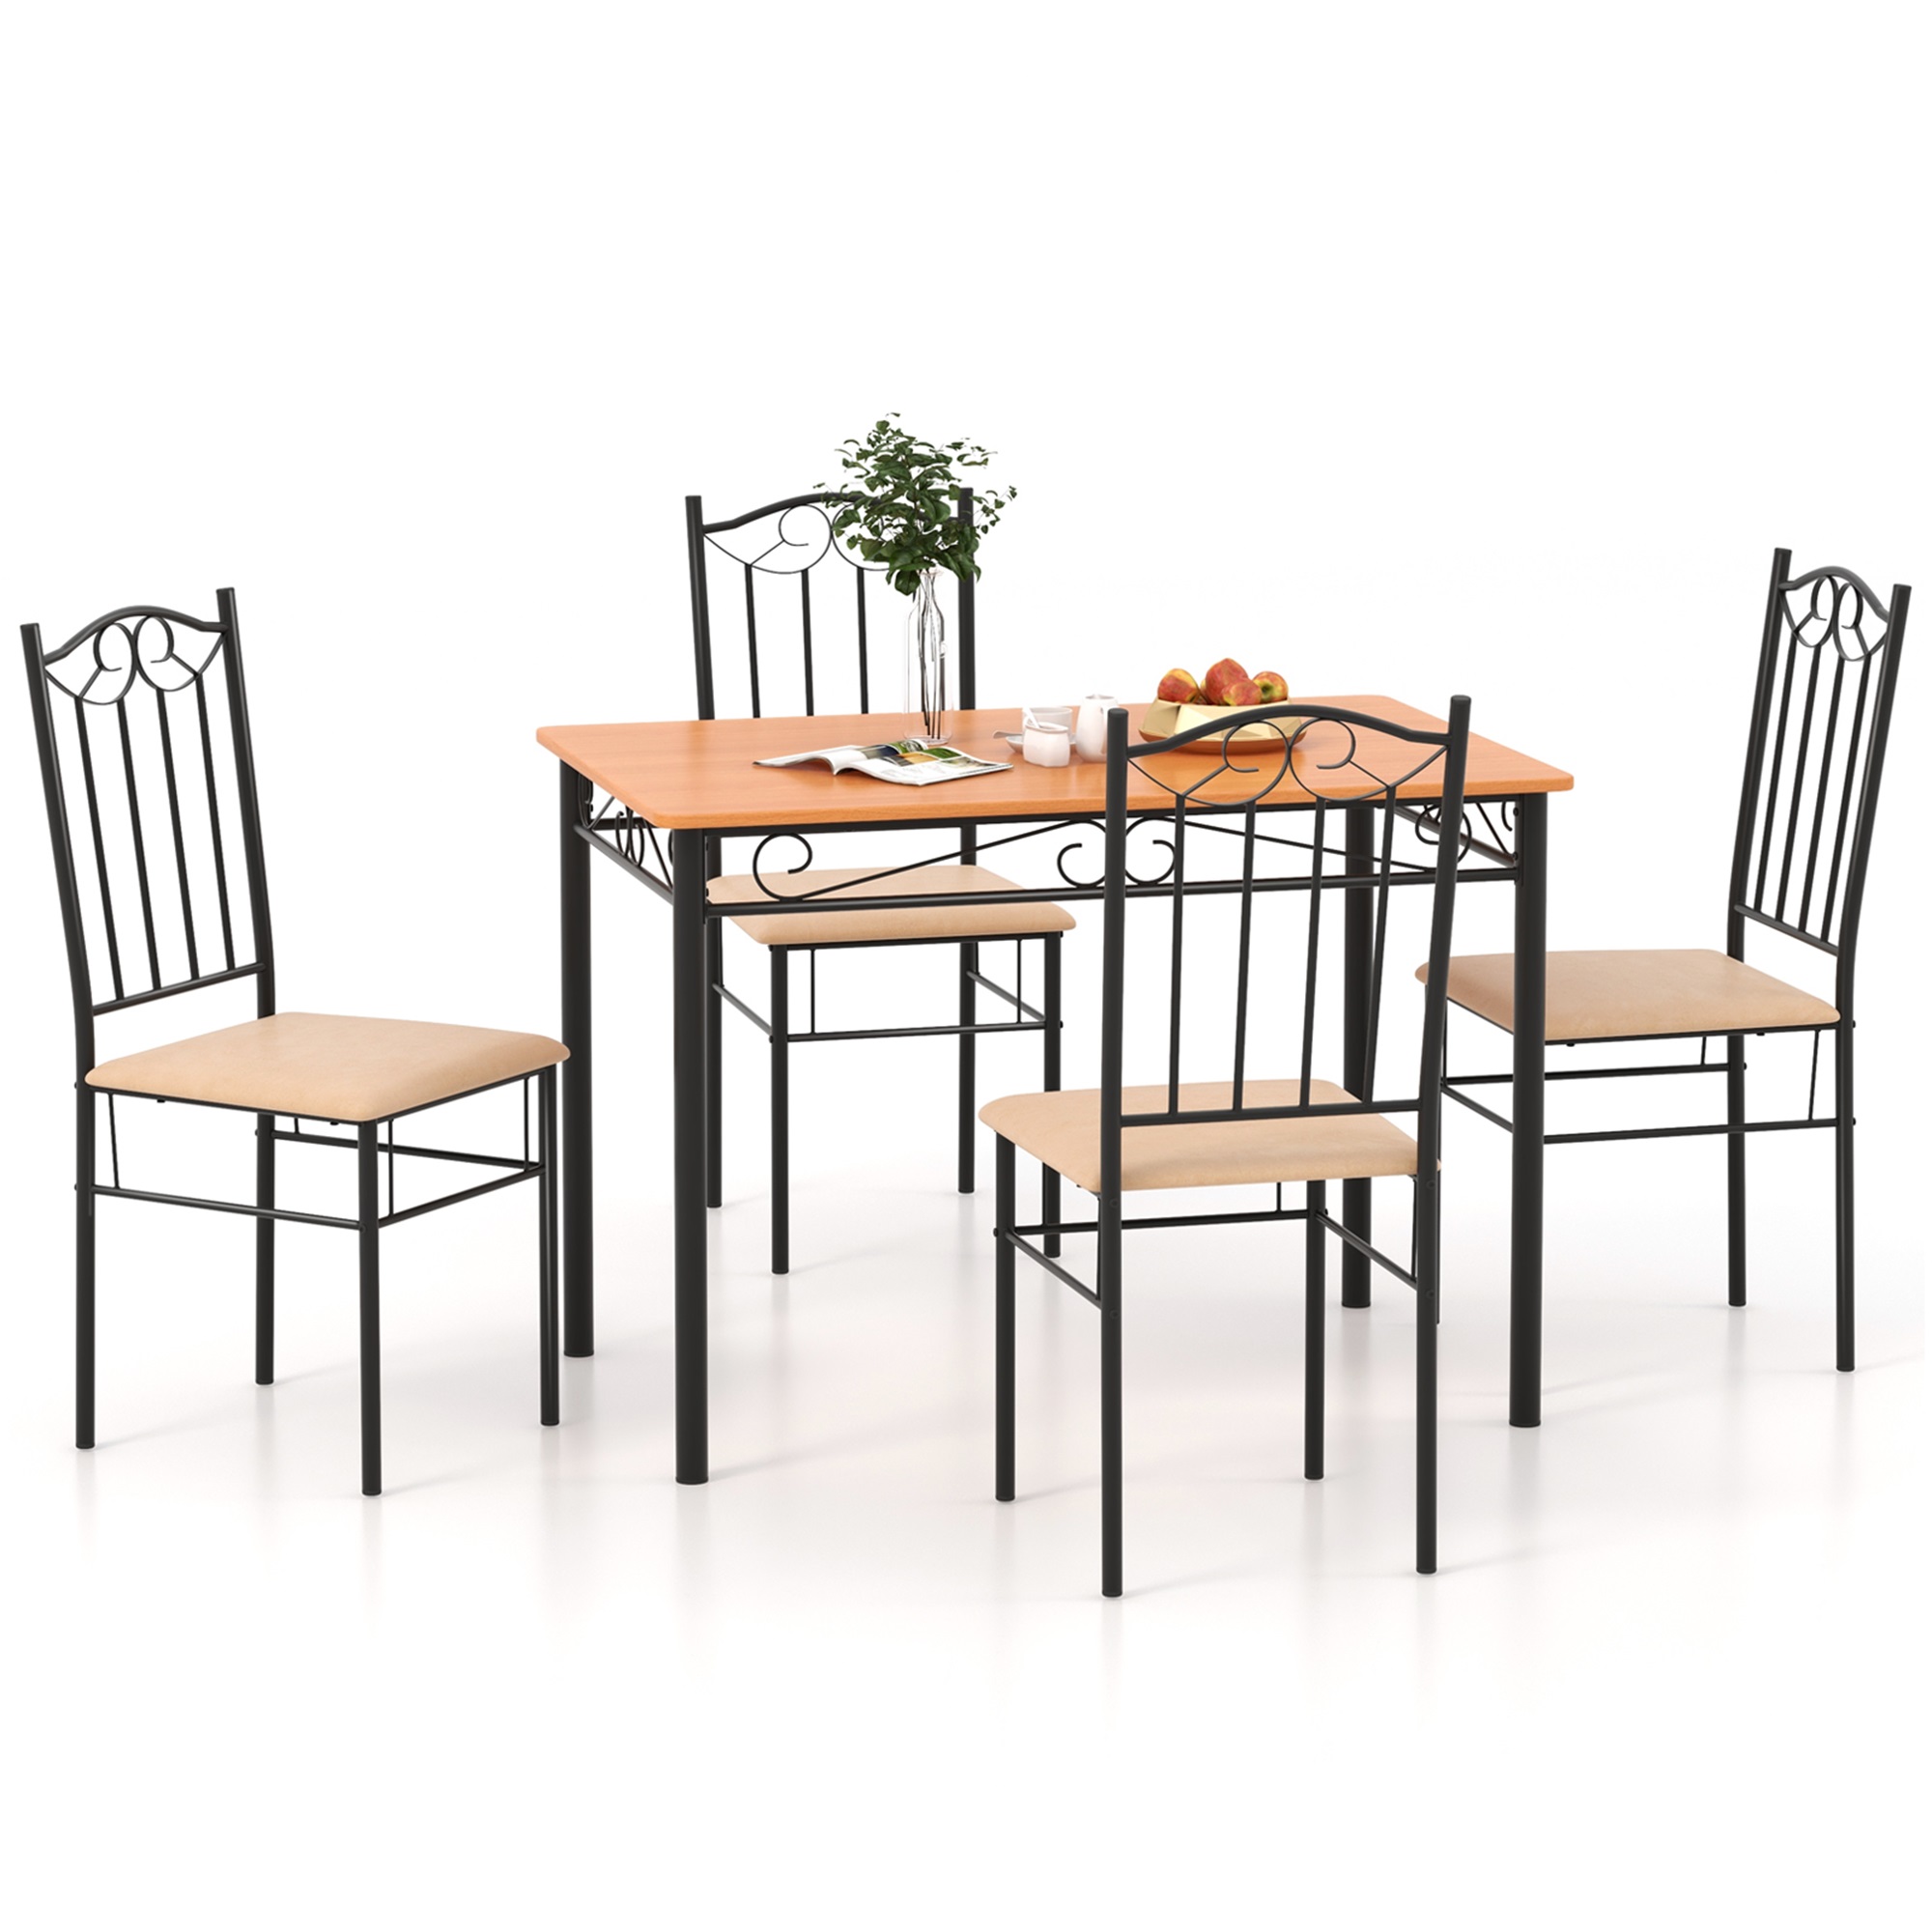 Costway 5 PC Dining Set Wood Metal 30" Table and 4 Chairs Black Kitchen Breakfast Furniture - image 2 of 8